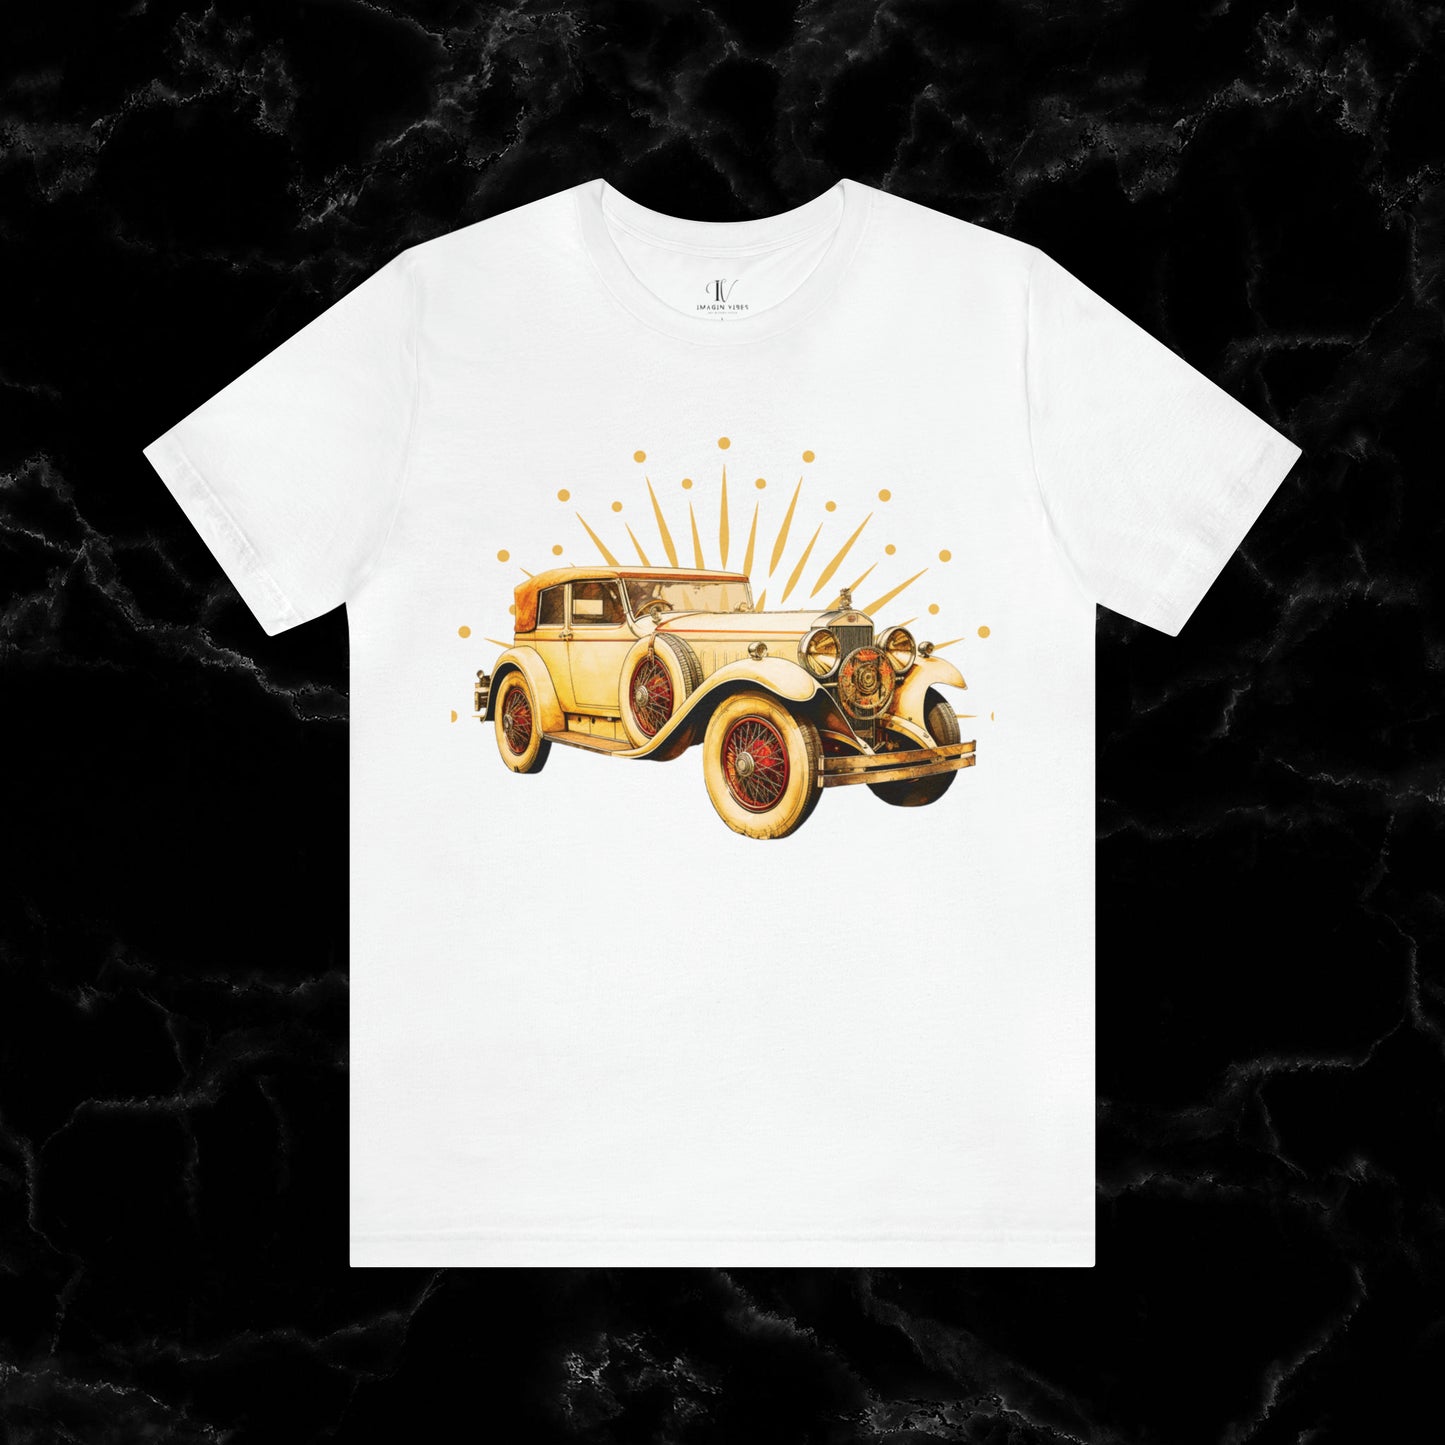 Vintage Car Enthusiast T-Shirt with Classic Wheels and Timeless Appeal T-Shirt White S 